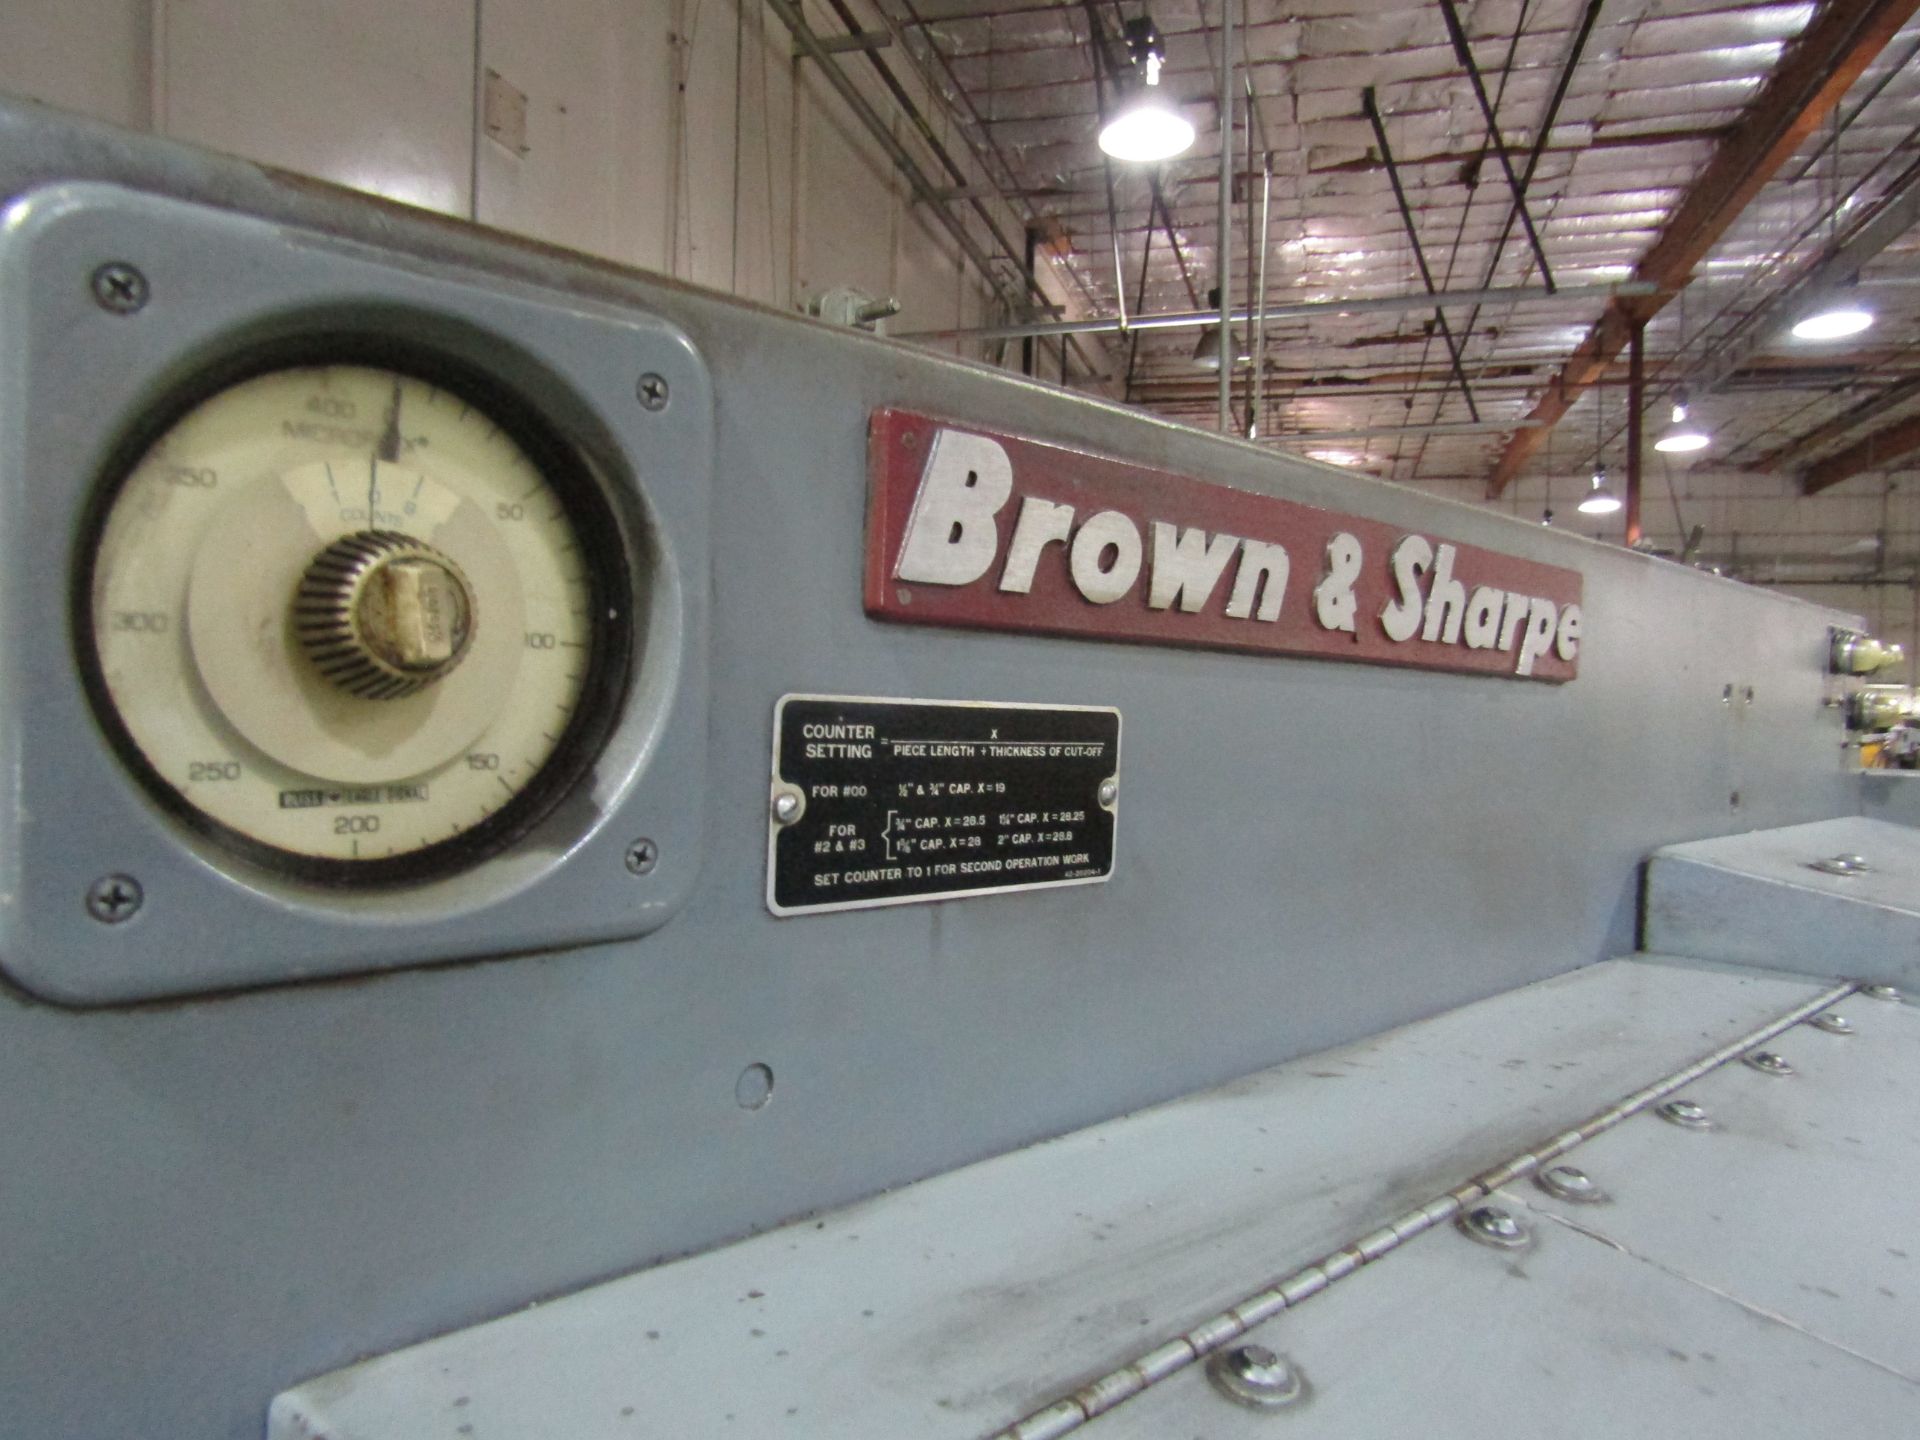 BROWNE & SHARPE AUTOMATIC LATHE SCREW MACHINE, SERIAL 545-2-6867 1 1/4. LOT TO INCLUDE: ASSOCIATED - Image 5 of 8